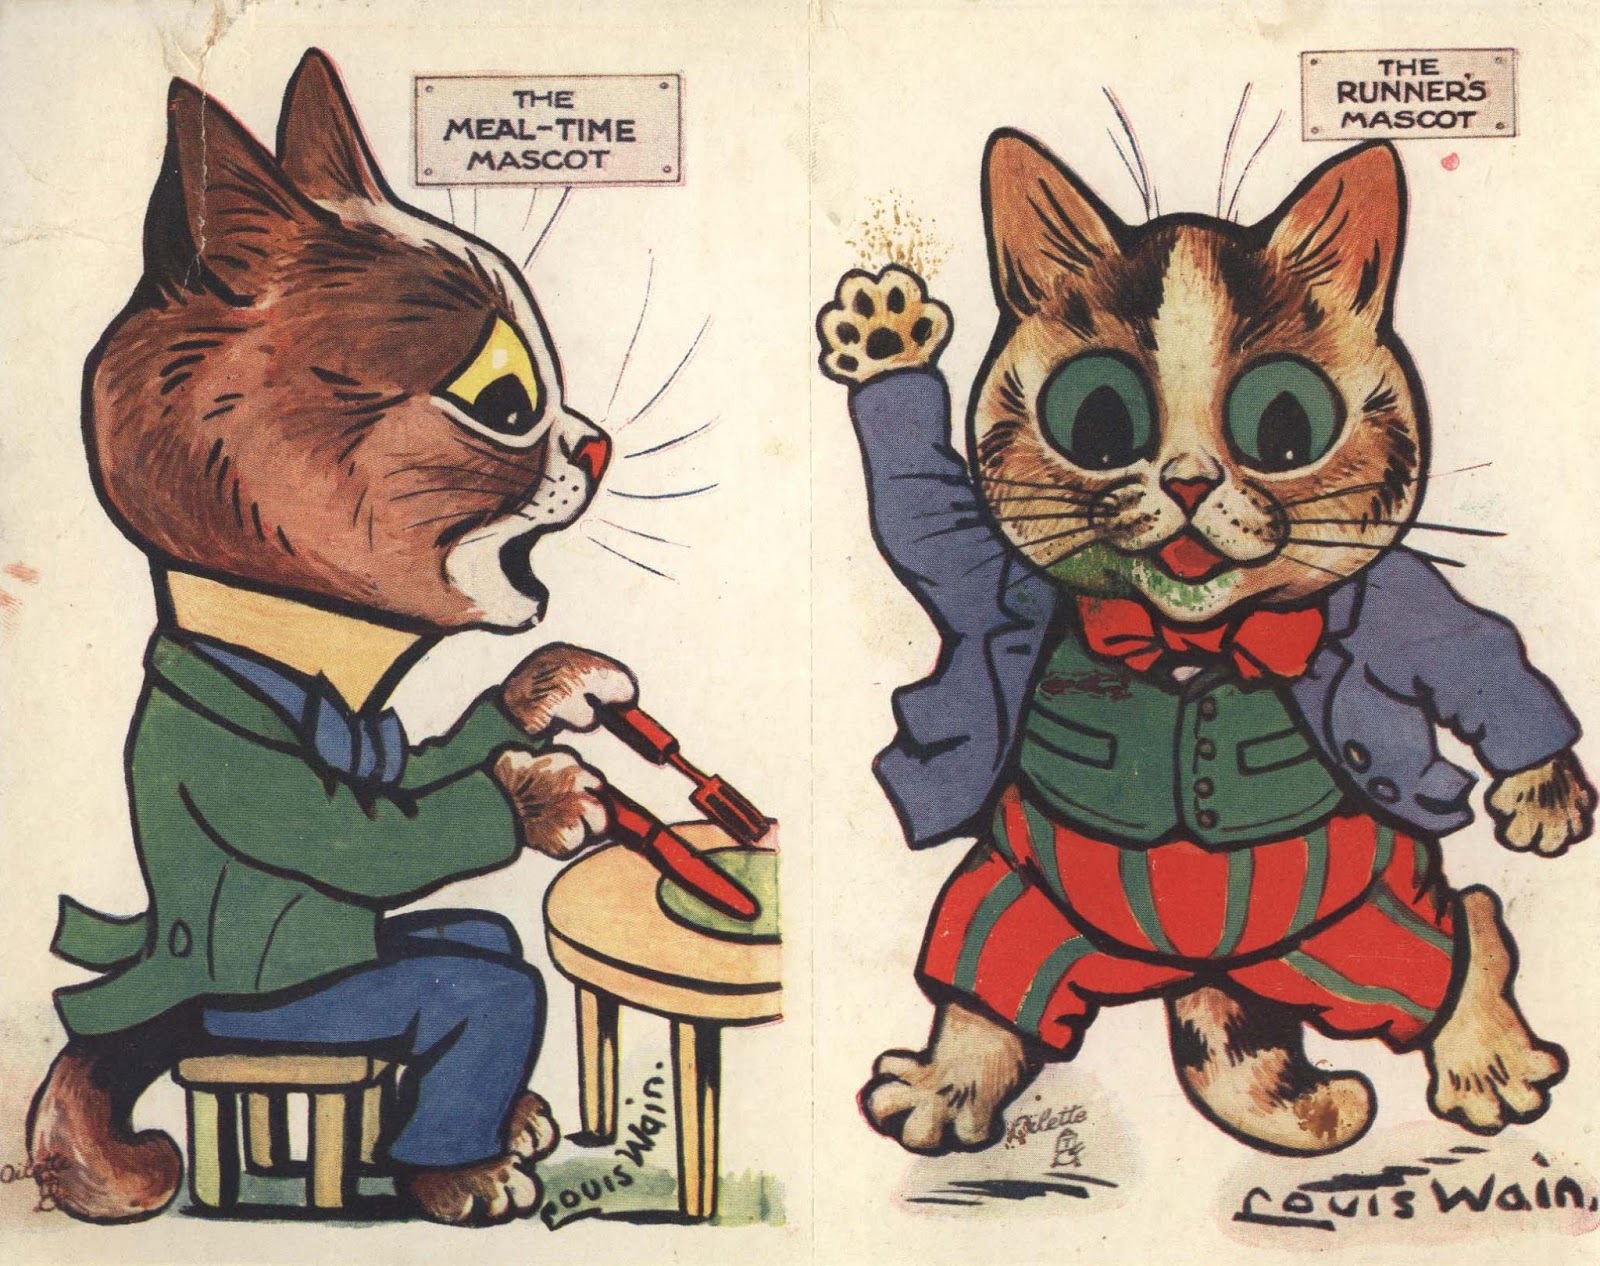 Father Tuck's Post Card Painting Book, Louis Wain